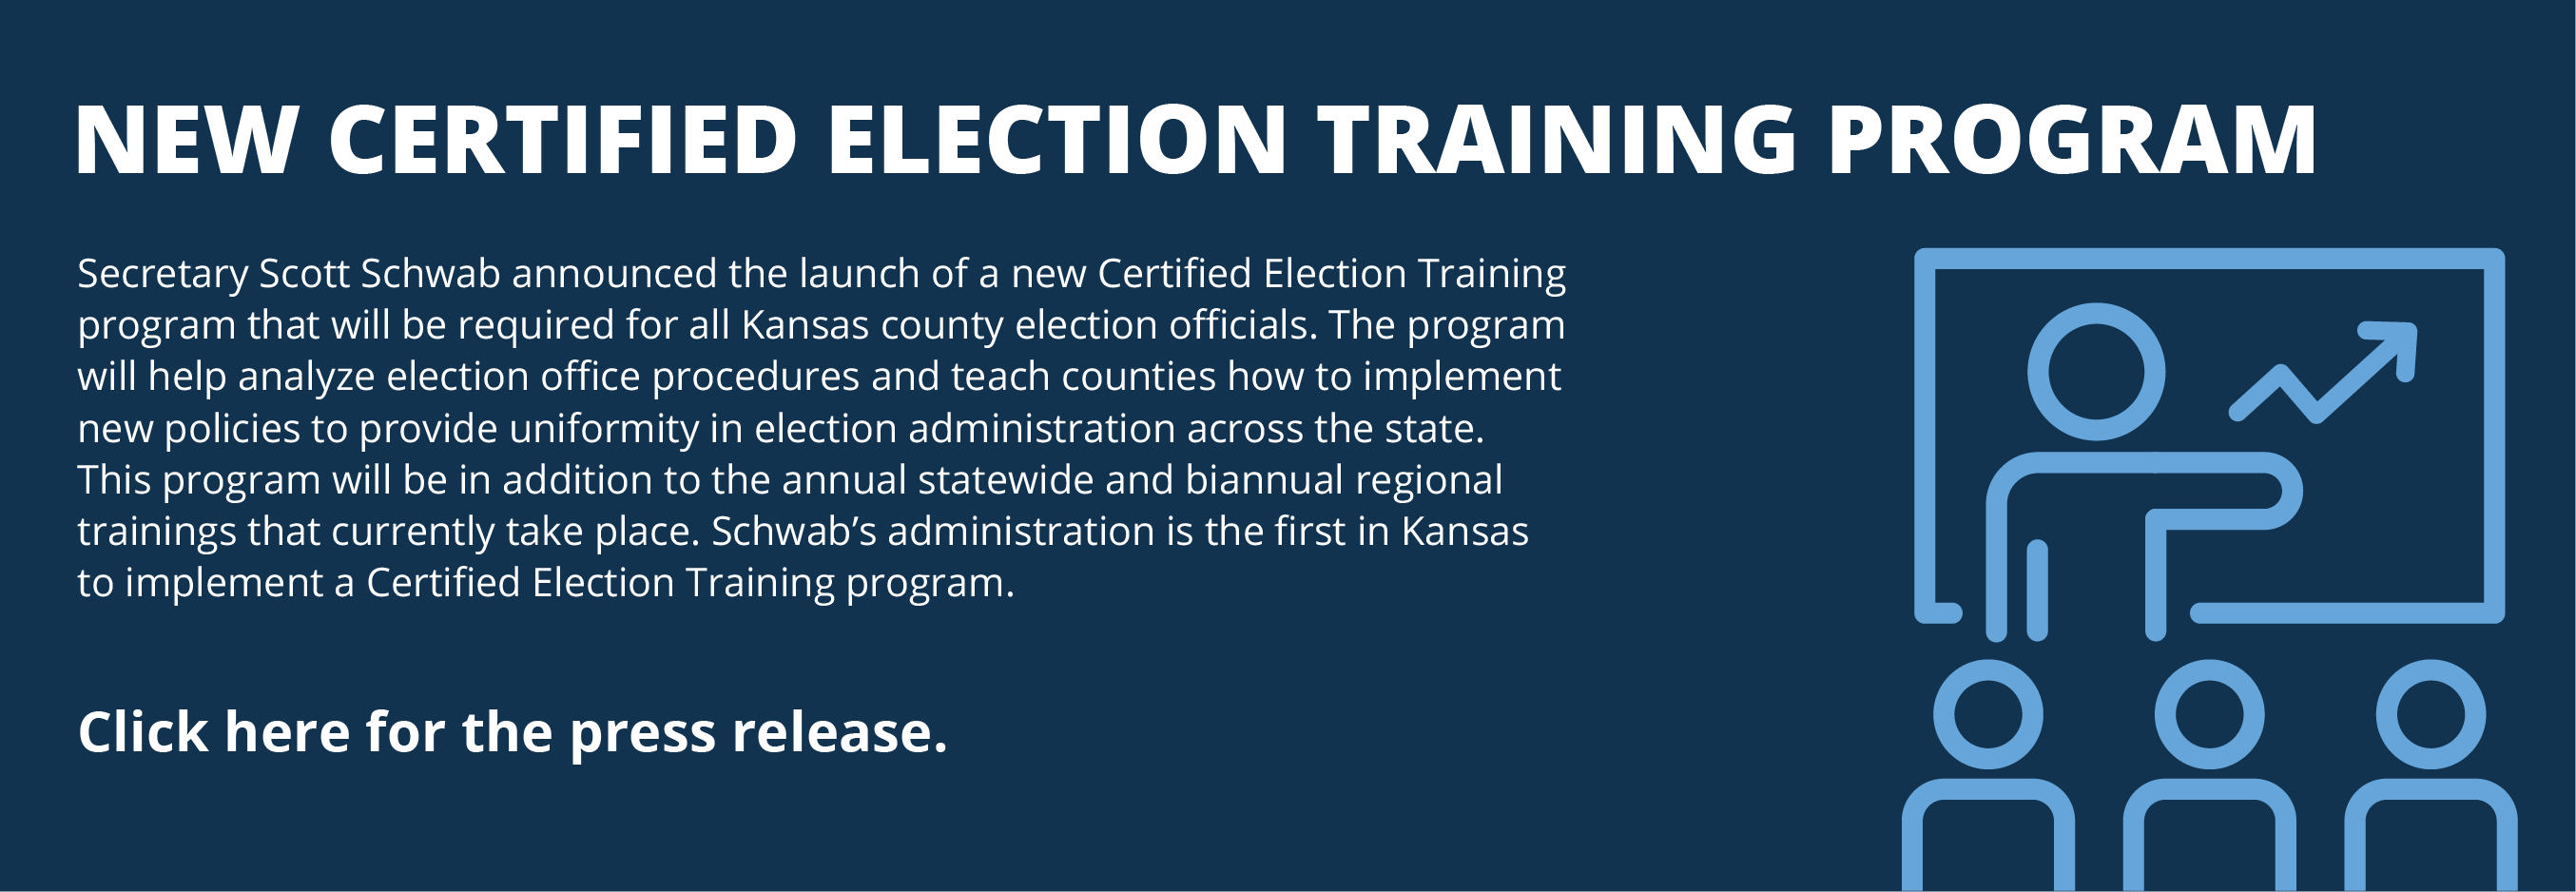 Certified Election Training image